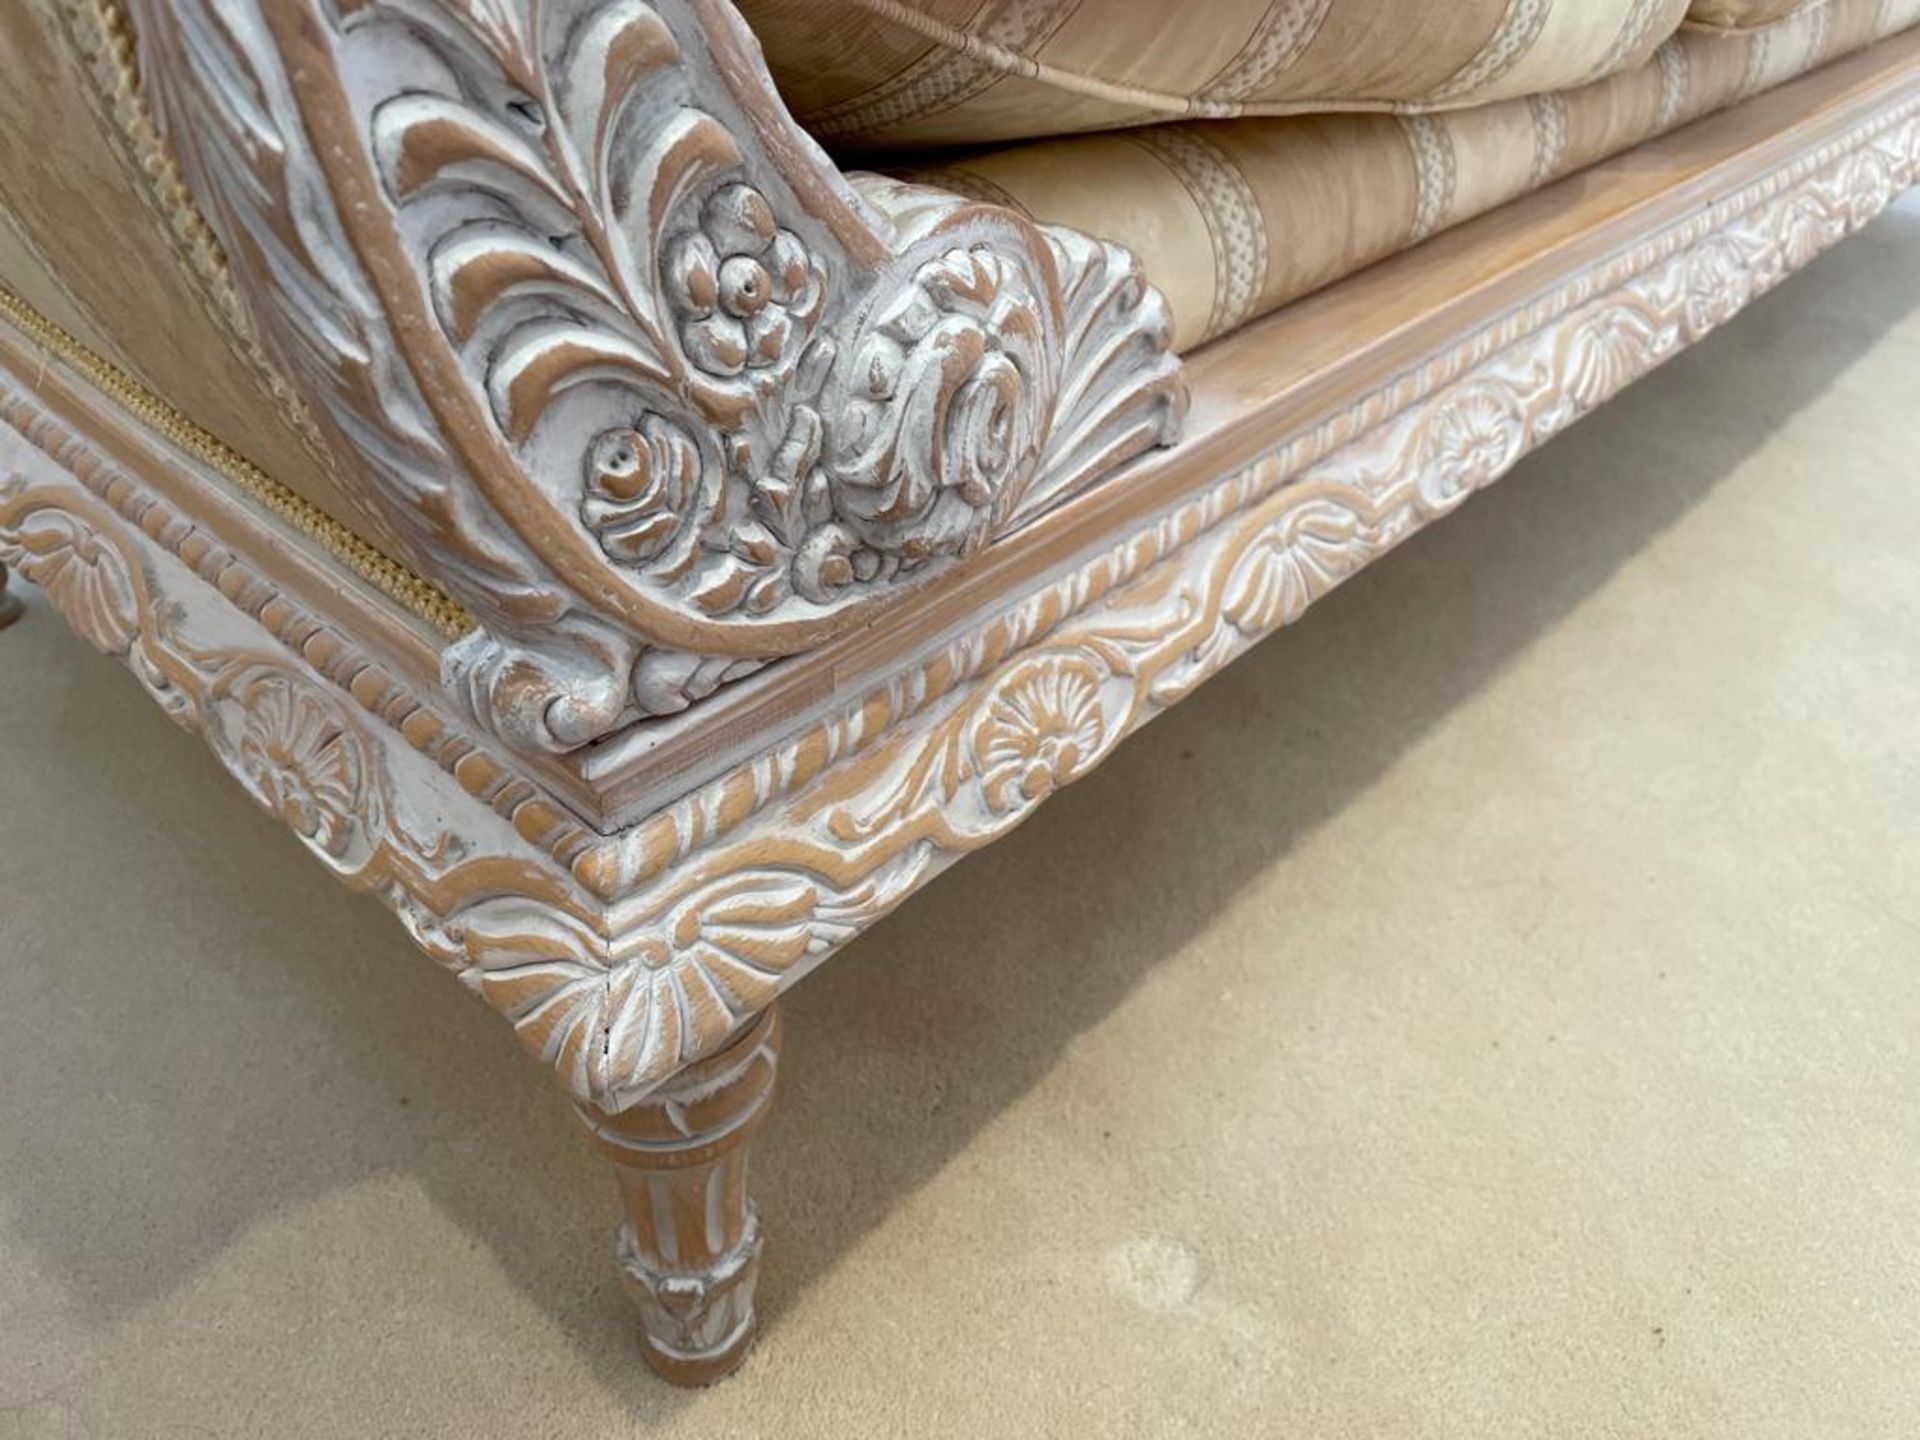 1 x French 19th Century Provincial Style Three Piece Sofa and Chair Set With Beautifully Carved Wood - Image 26 of 41